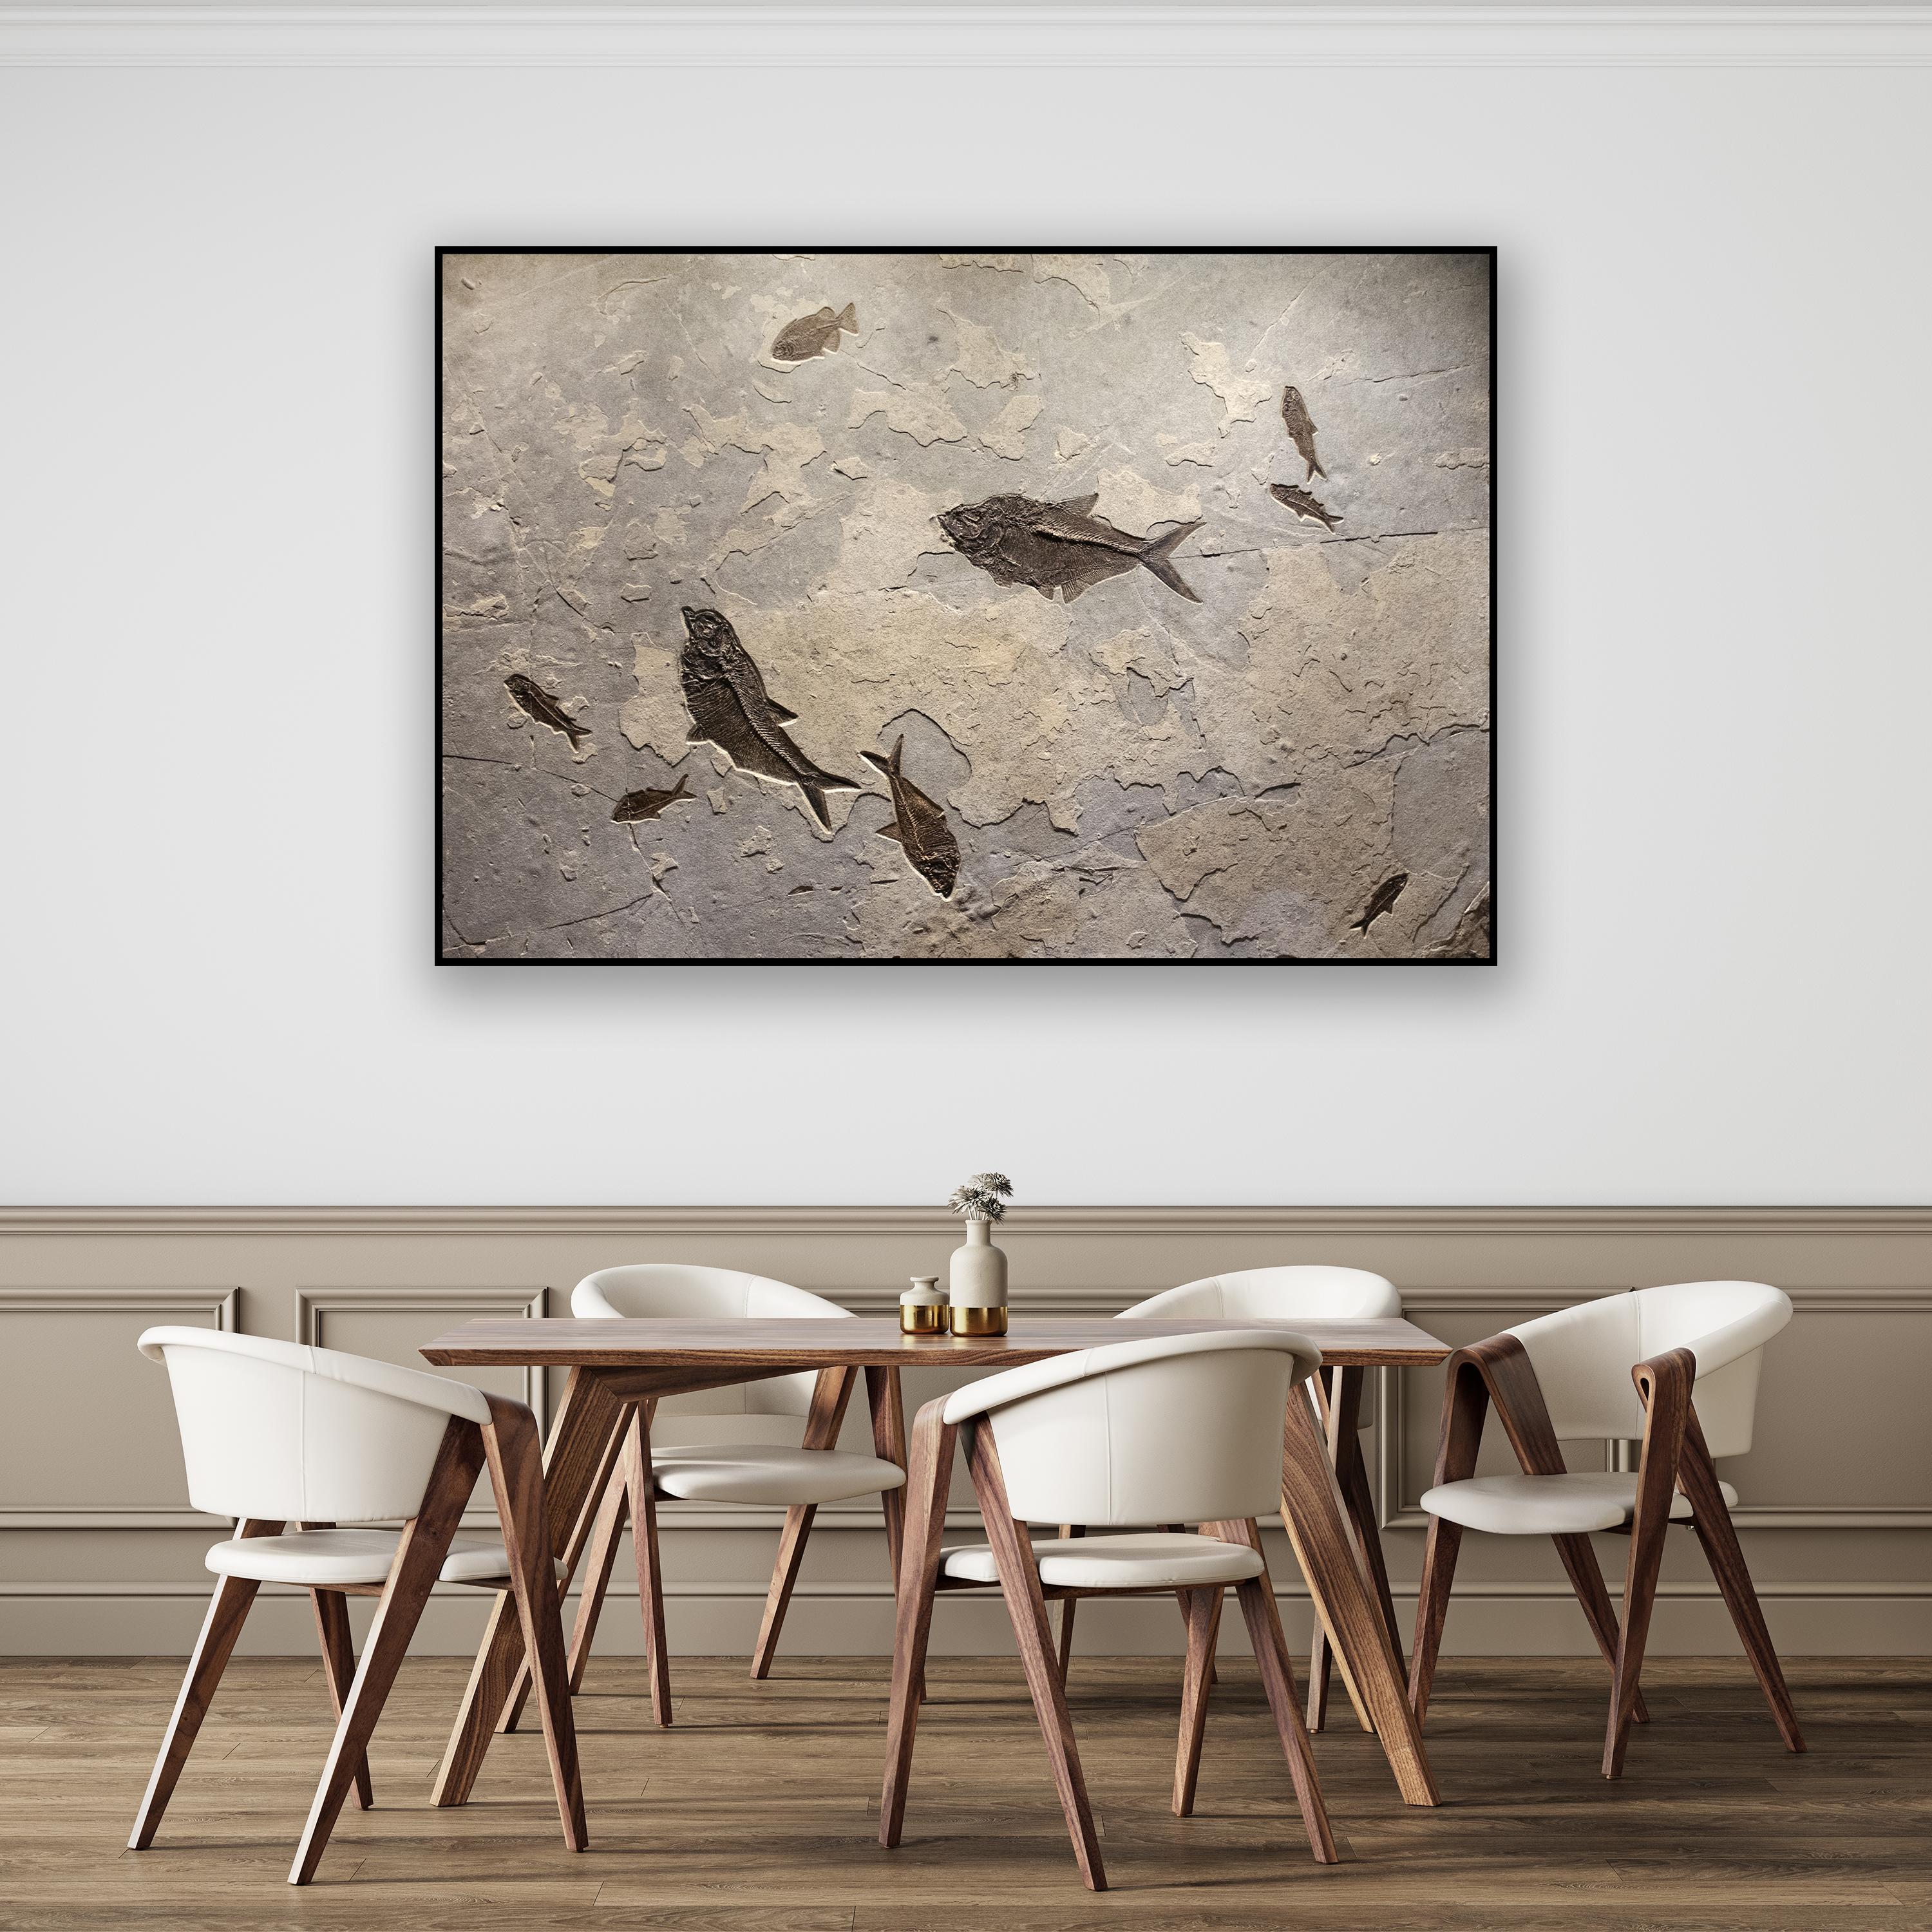 This exquisite and impressively sized fossil mural features a gorgeous collection of Eocene era fossil fish, all dating around 50 million years old. One Phareodus testis, four Diplomystus dentatus, and four Knightia eocaena flow beautifully in their